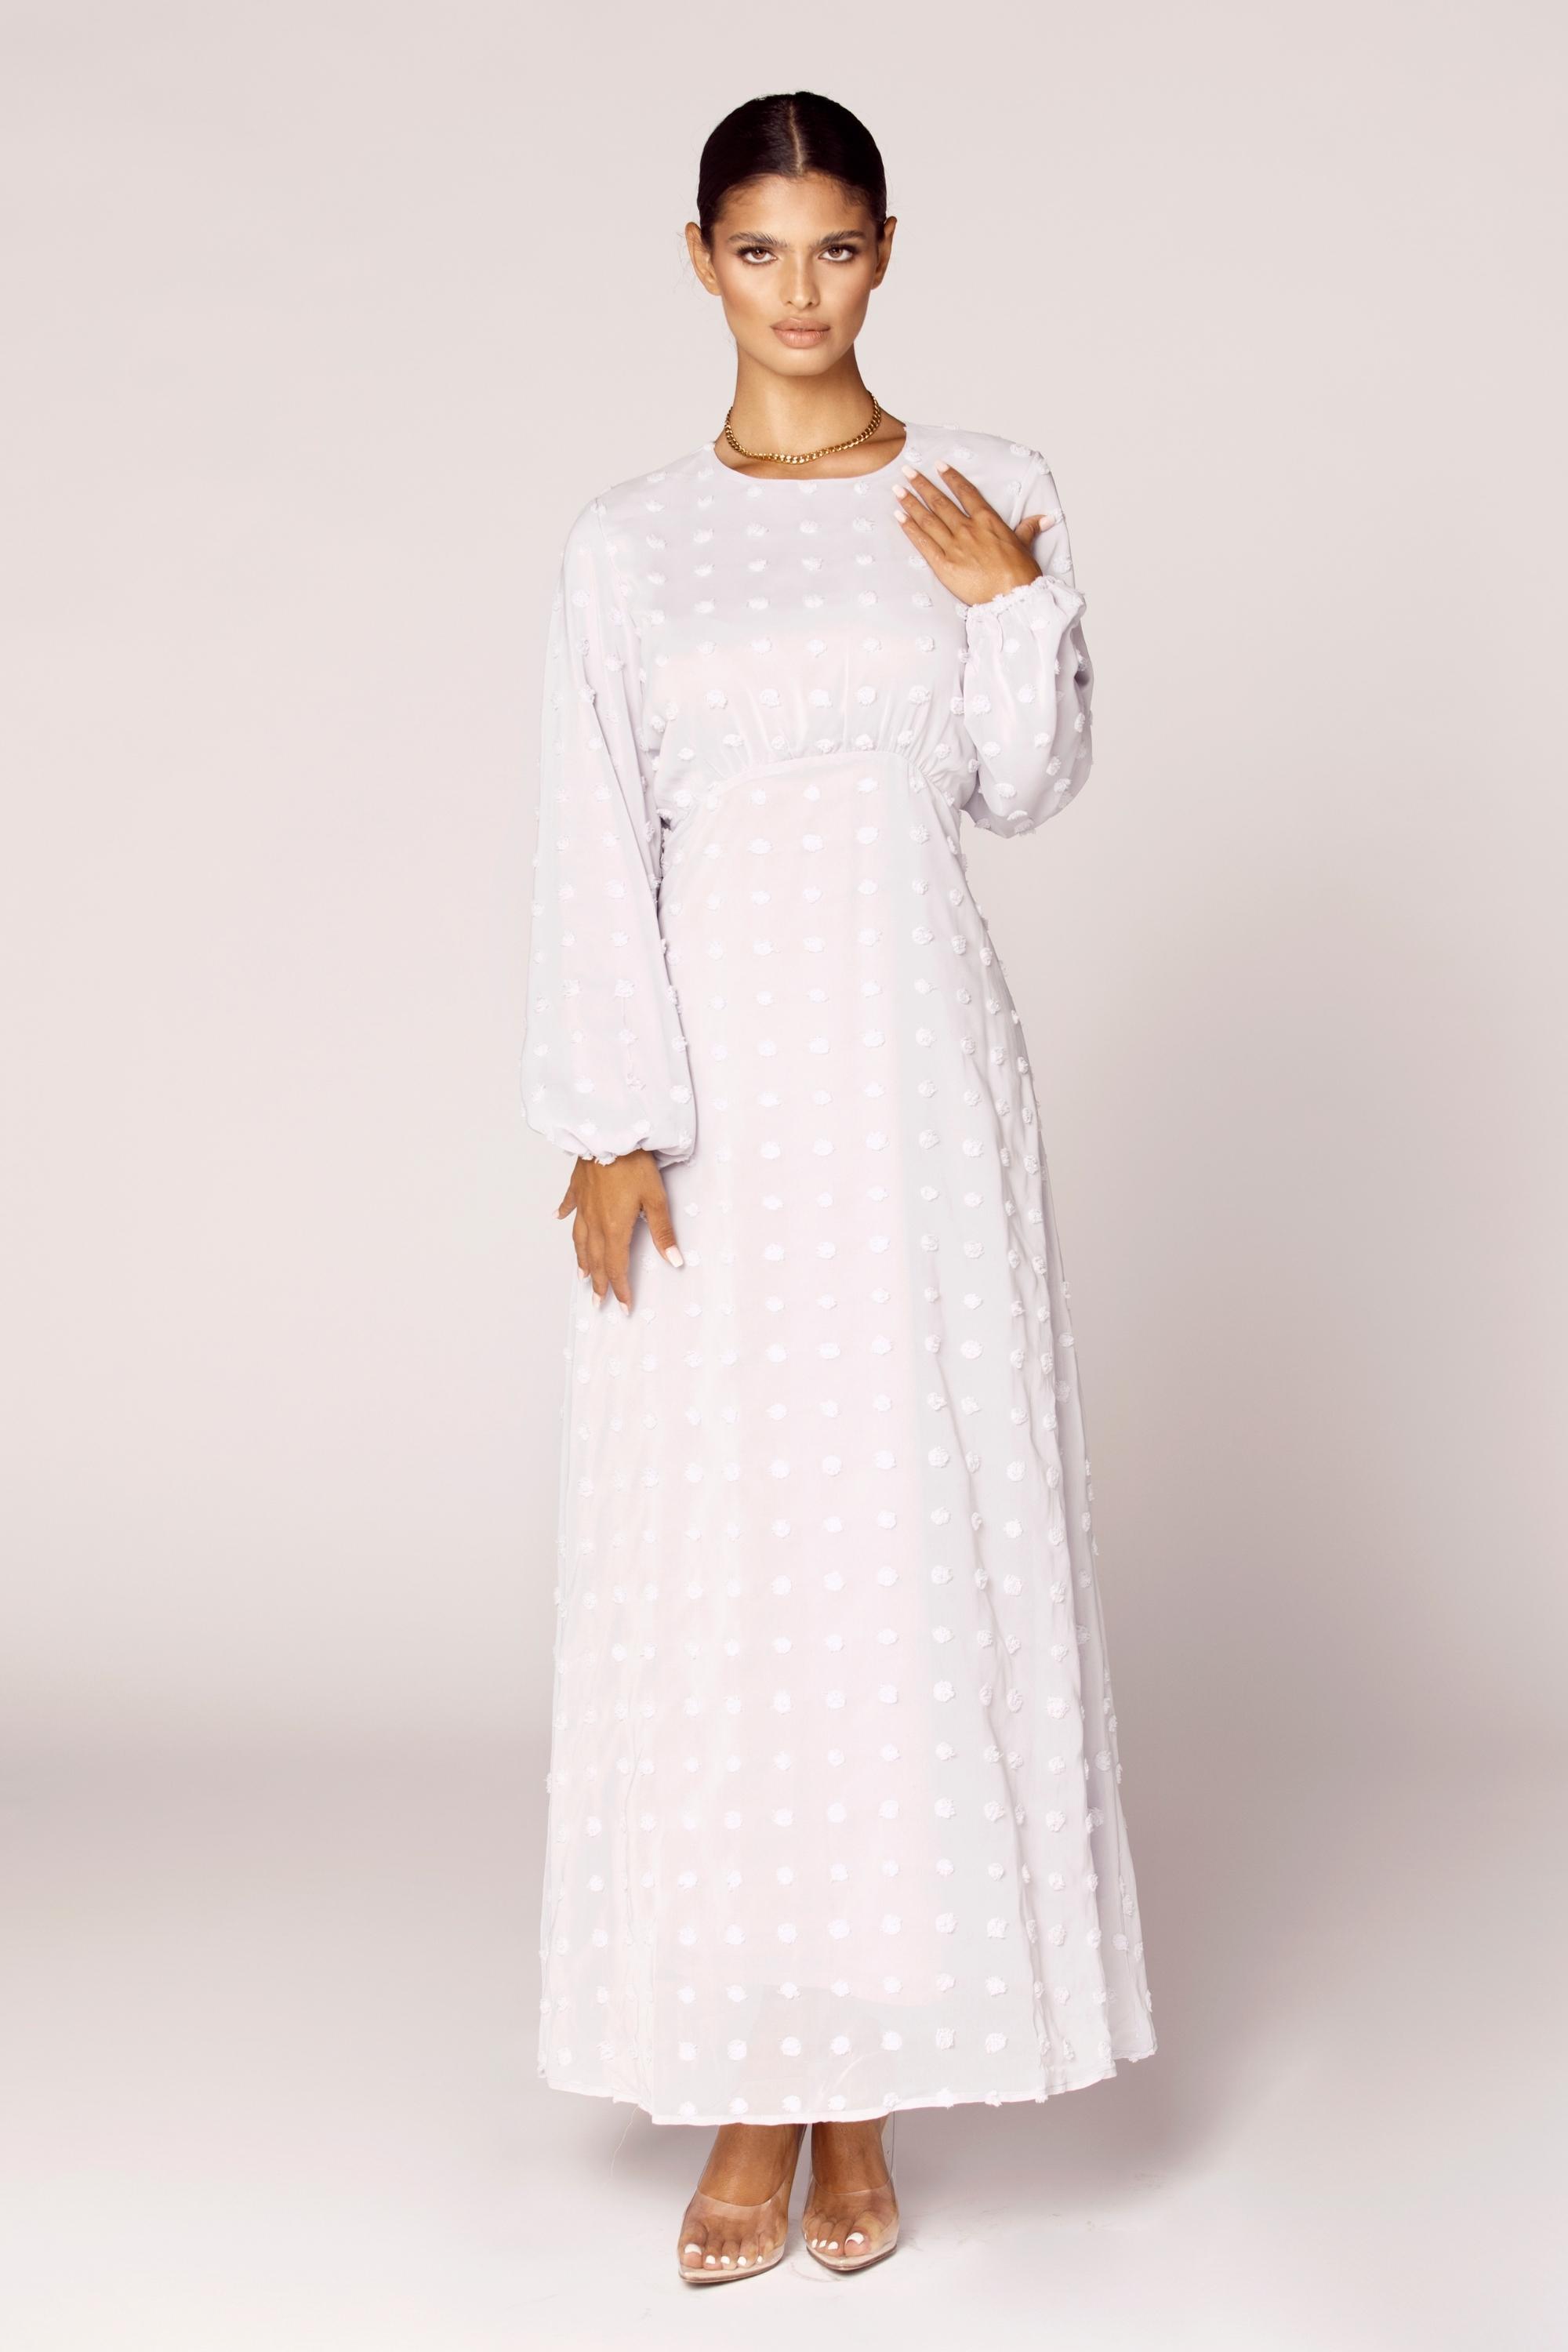 Lavender Swiss Dot Maxi Dress Veiled Collection 